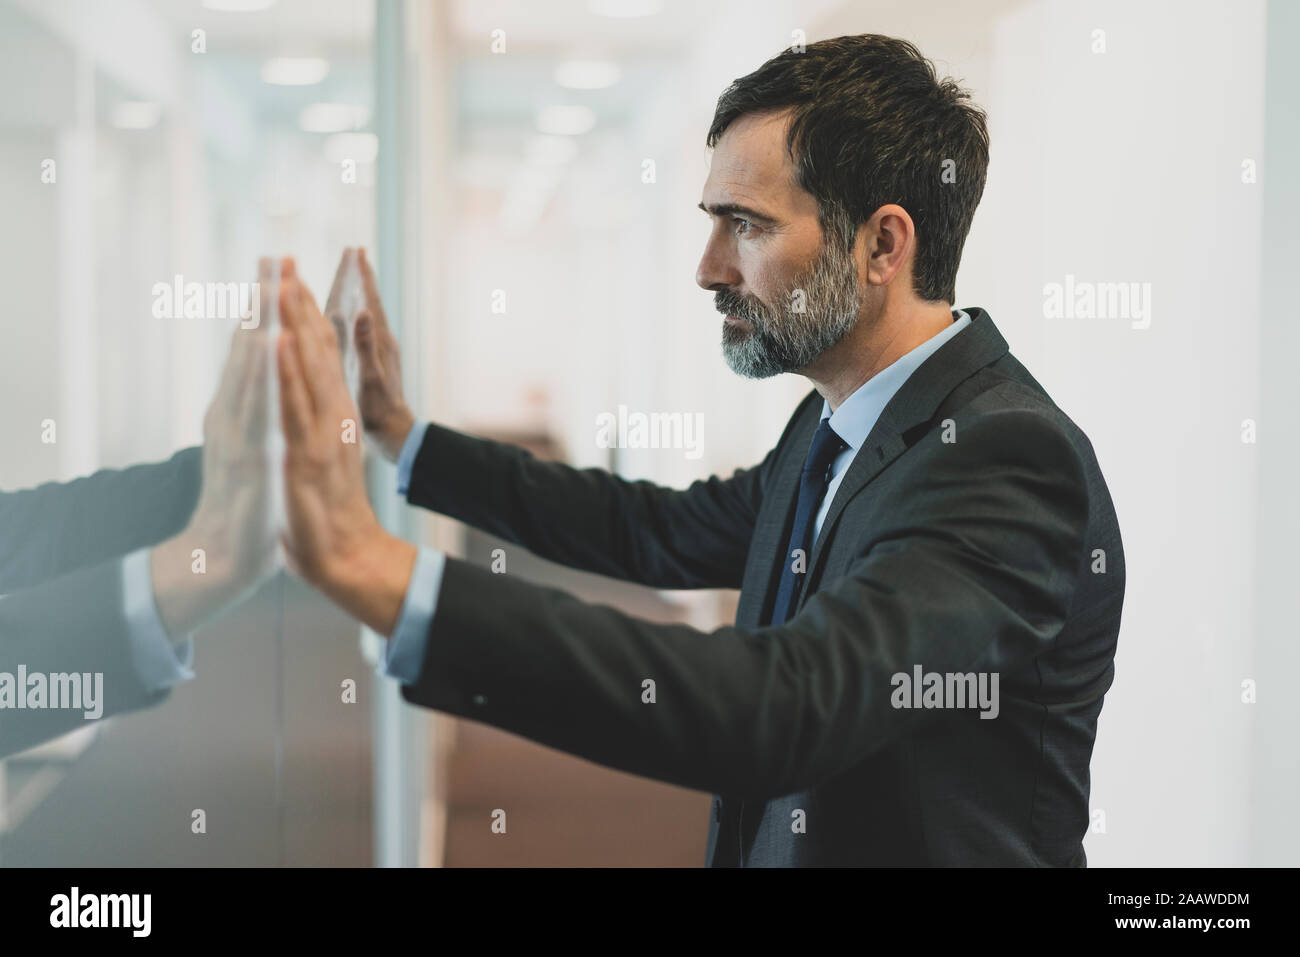 Thoughtful mature businessman leaning against glass wall in office Stock Photo